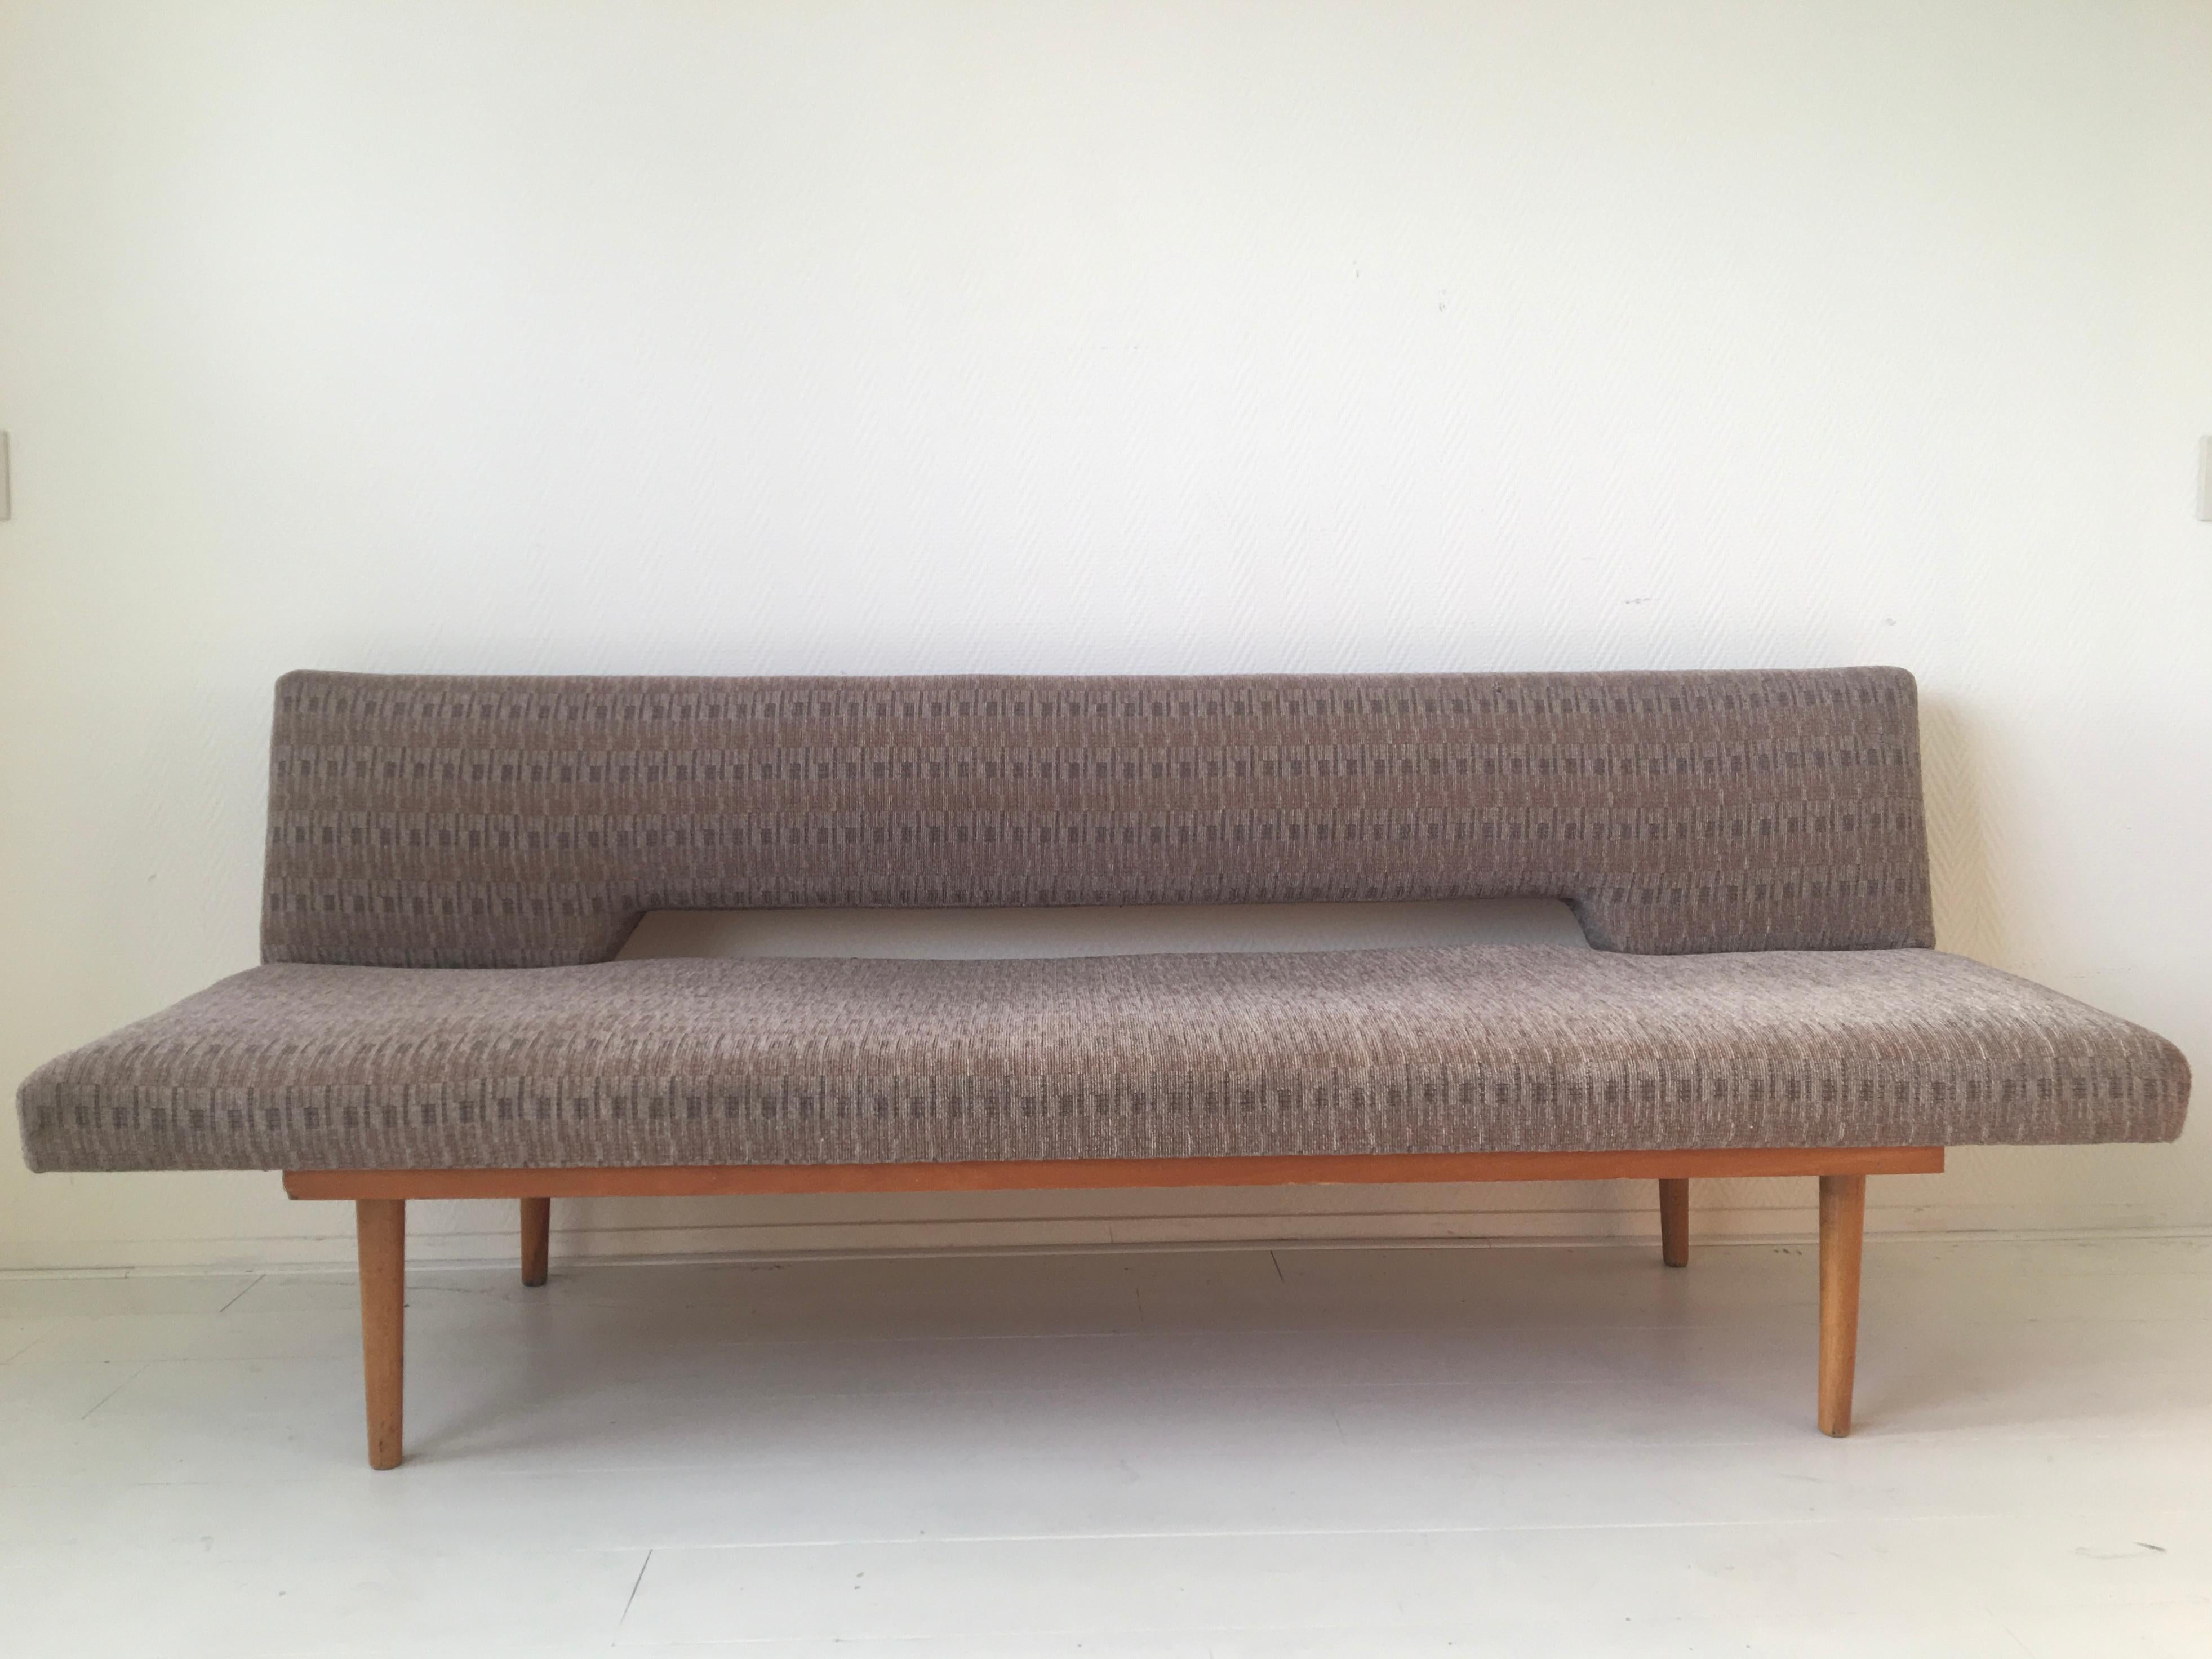 Wonderful Mid-Century Modern sofa, designed by Miroslav Navratil, circa 1960s. This simple sofa can easily be changed into a bed. The sofa features a beech frame with still the original fabric. Timeless design with some wear to the fabric.